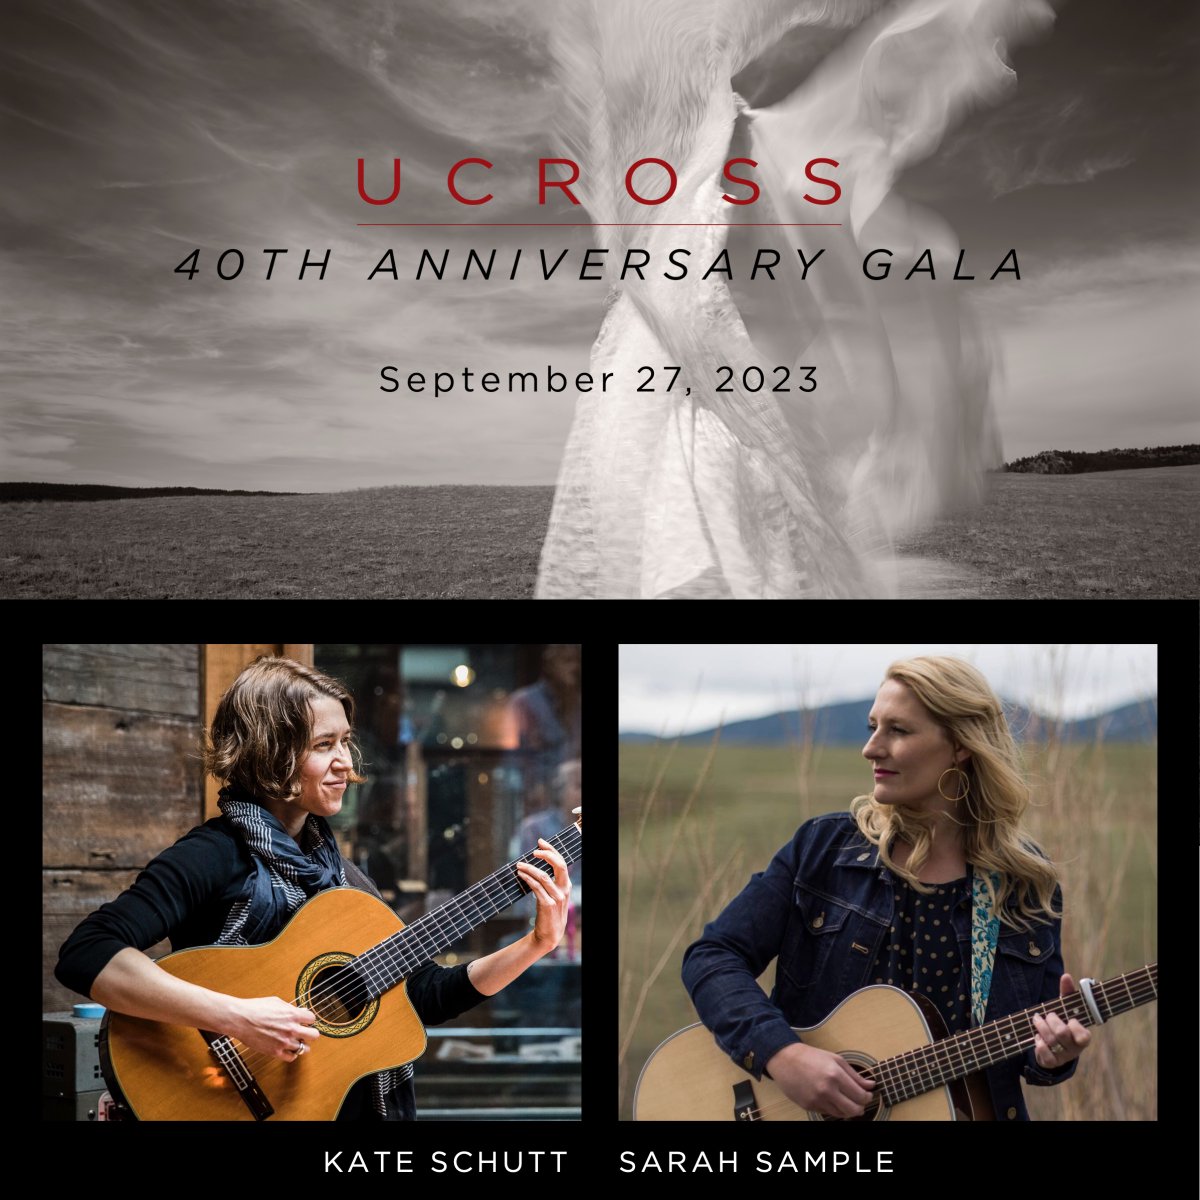 The Ucross 40th Anniversary Gala is just under one month away! We are delighted to announce that the evening will feature a songwriters in the round-style performance by Ucross alumna and trustee @kateschutt and Ucross alumna @sarahsample88. 

Learn more: bit.ly/Ucross-Gala